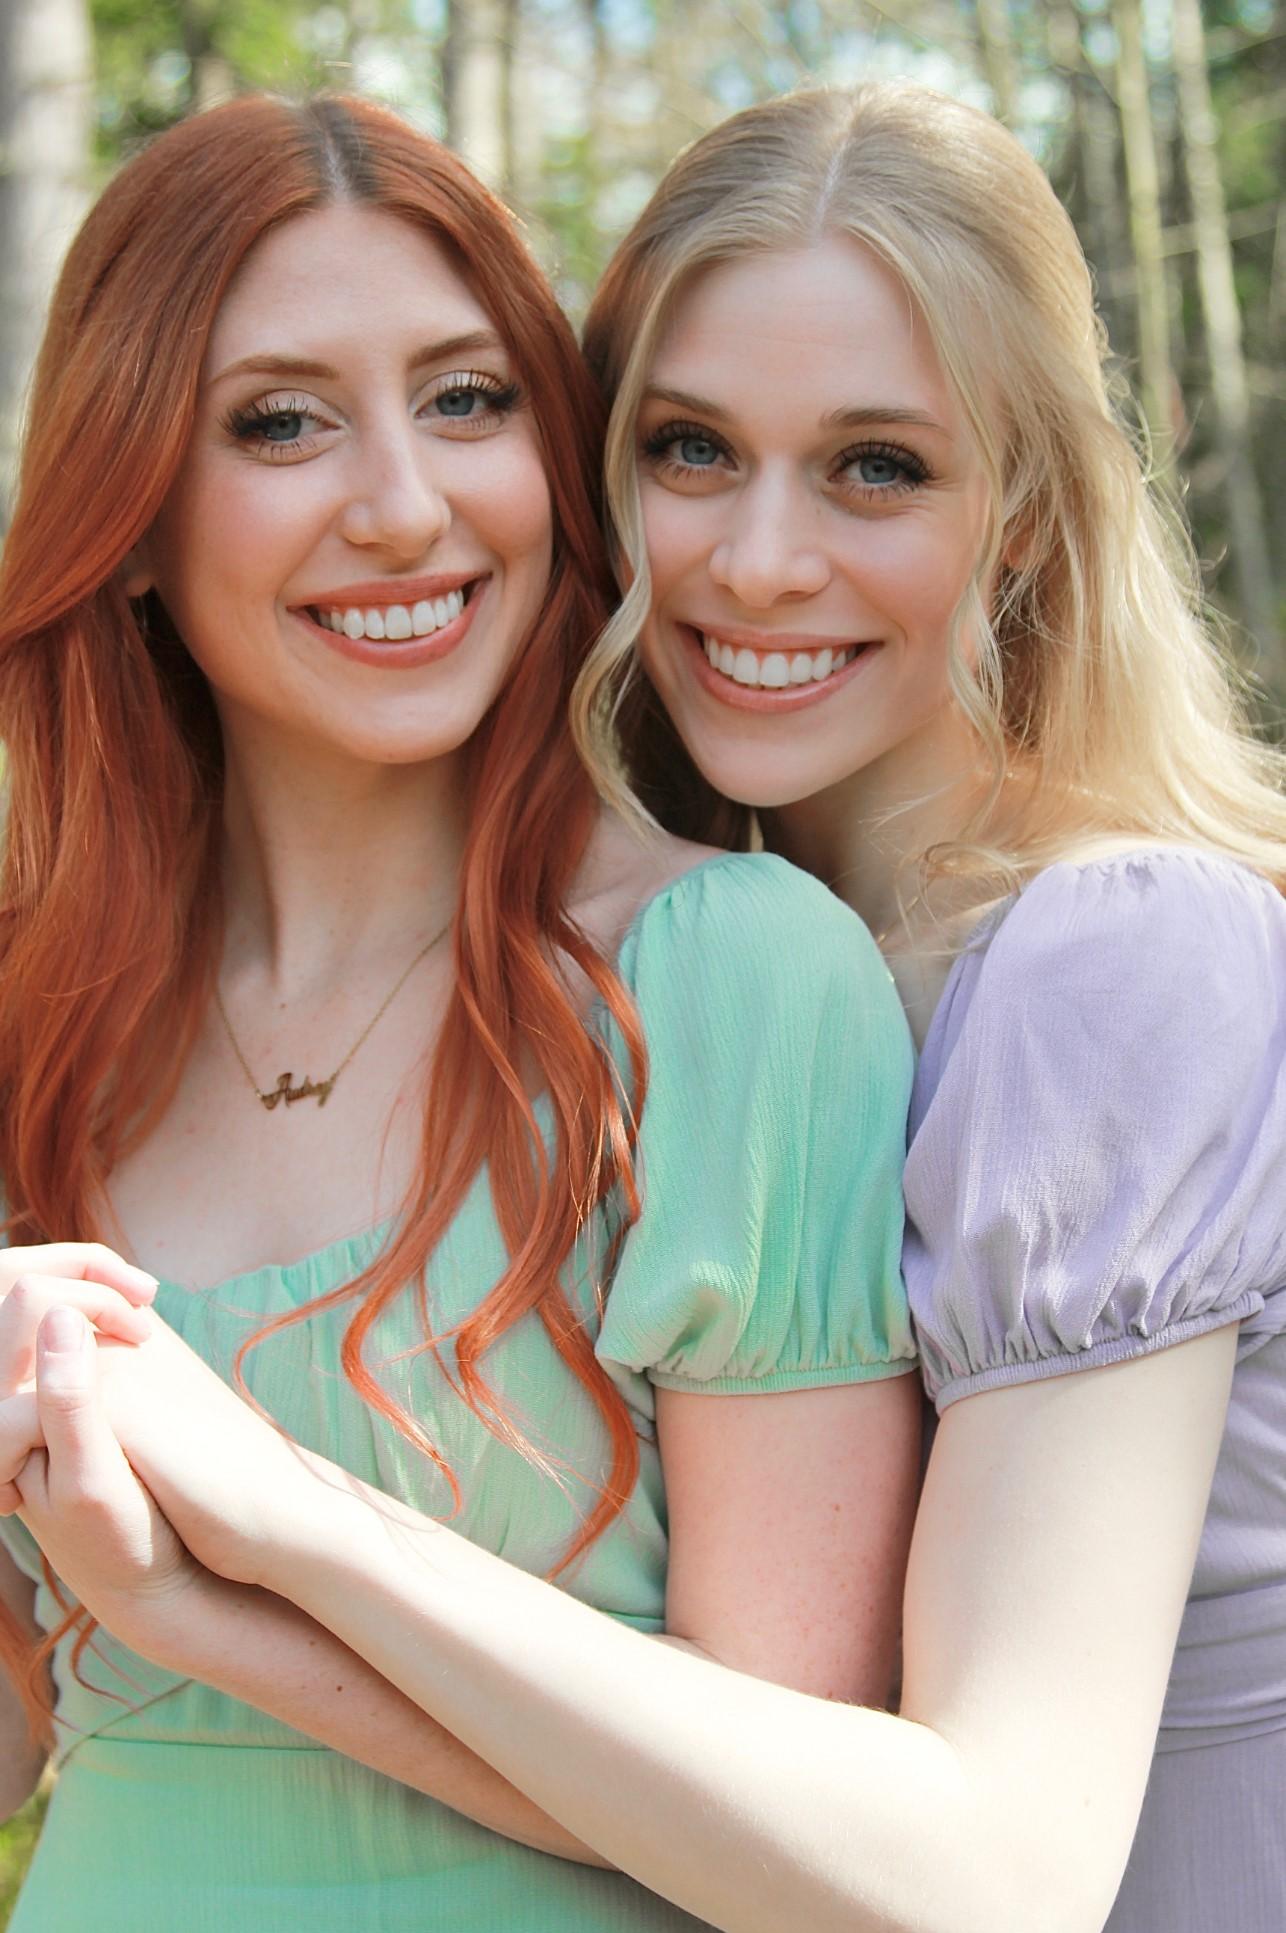 two girls with long hair: a red-head and a blond, embraced back to front in a friendly manner, and smiling